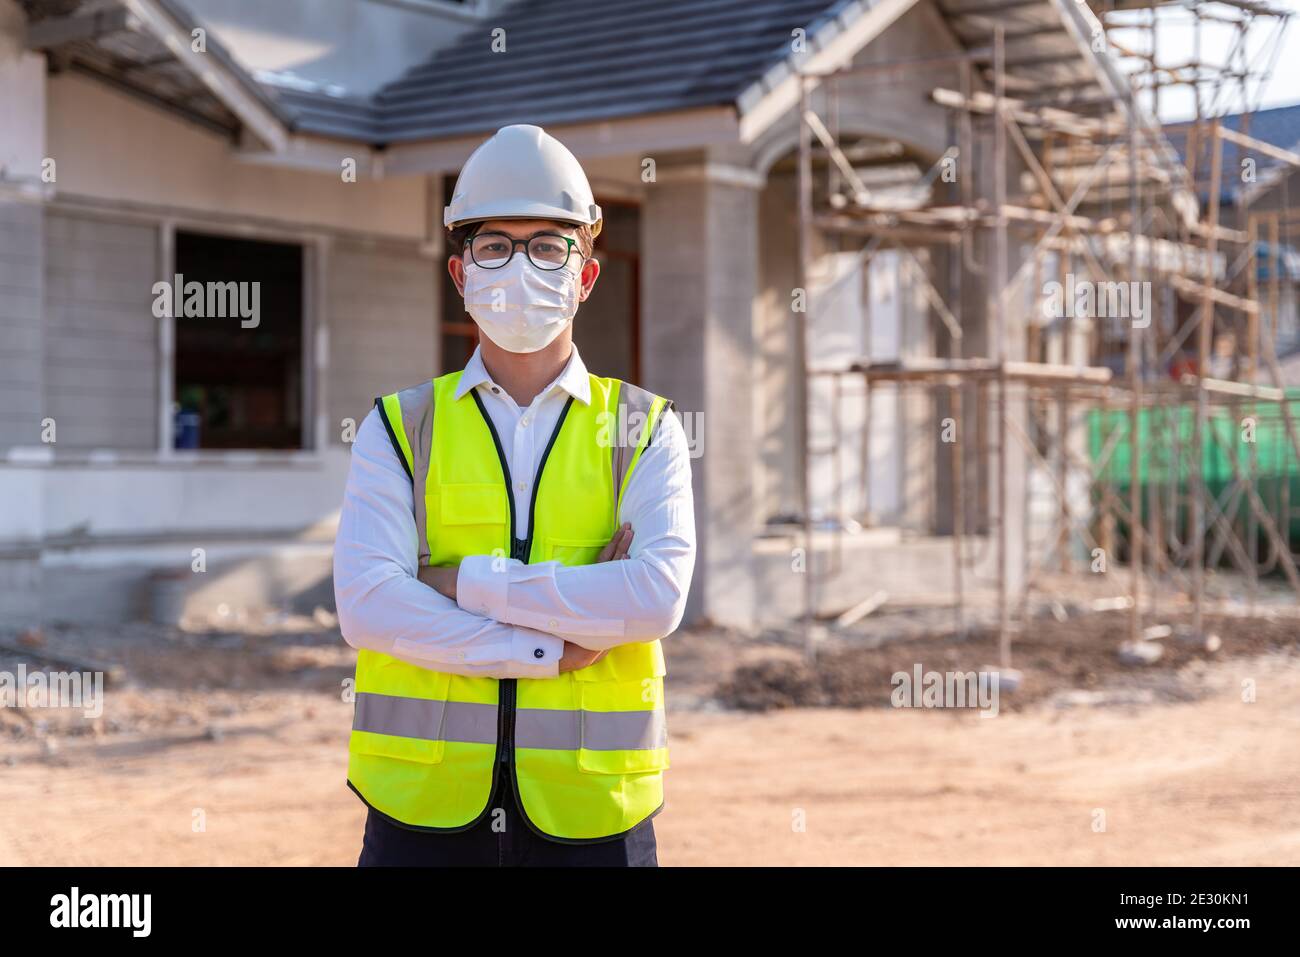 Portrait of Architect wearing a mask on a building construction site, Homebuilding Ideas and Prevention of Coronavirus Disease. Stock Photo